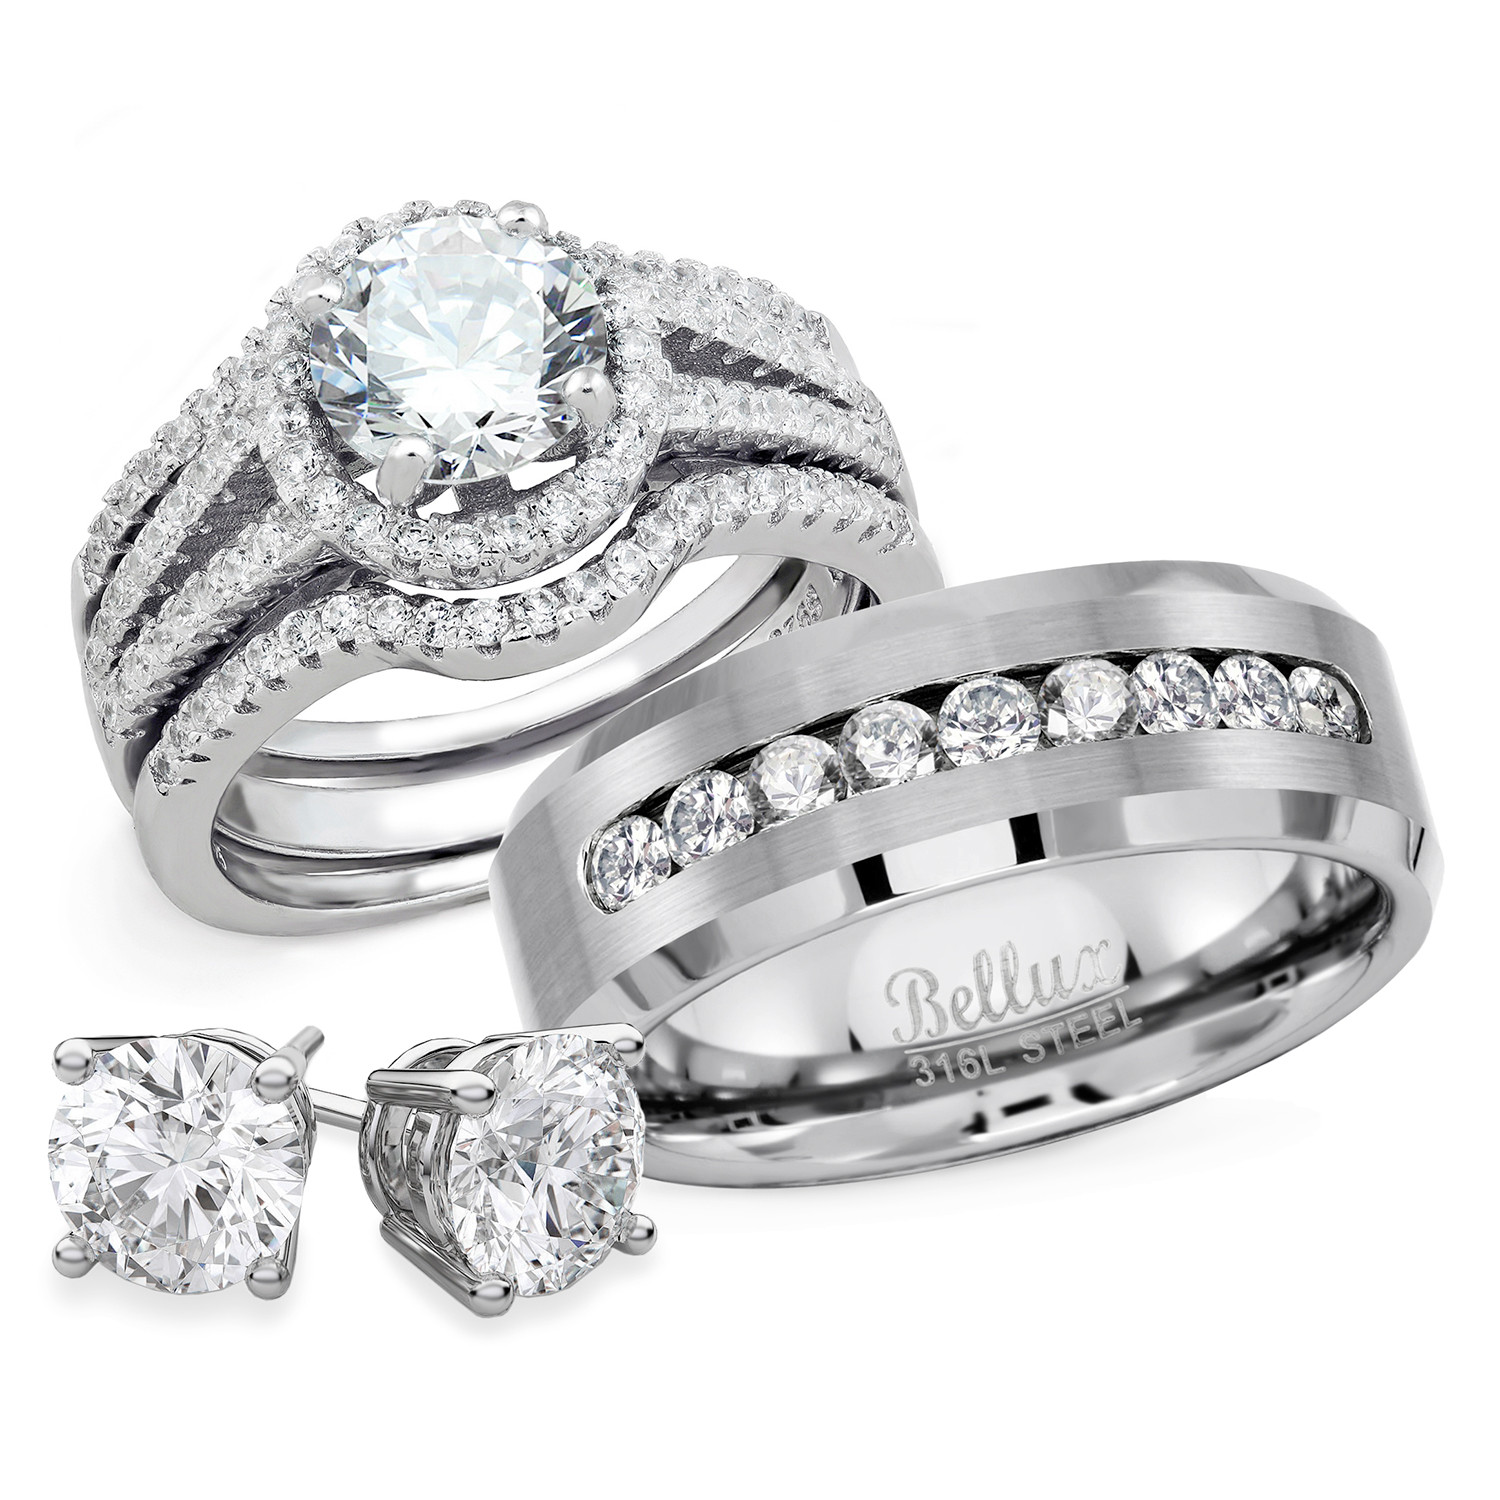 Walmart Wedding Ring Sets
 Bellux Style His and Hers Wedding Engagement Anniversary